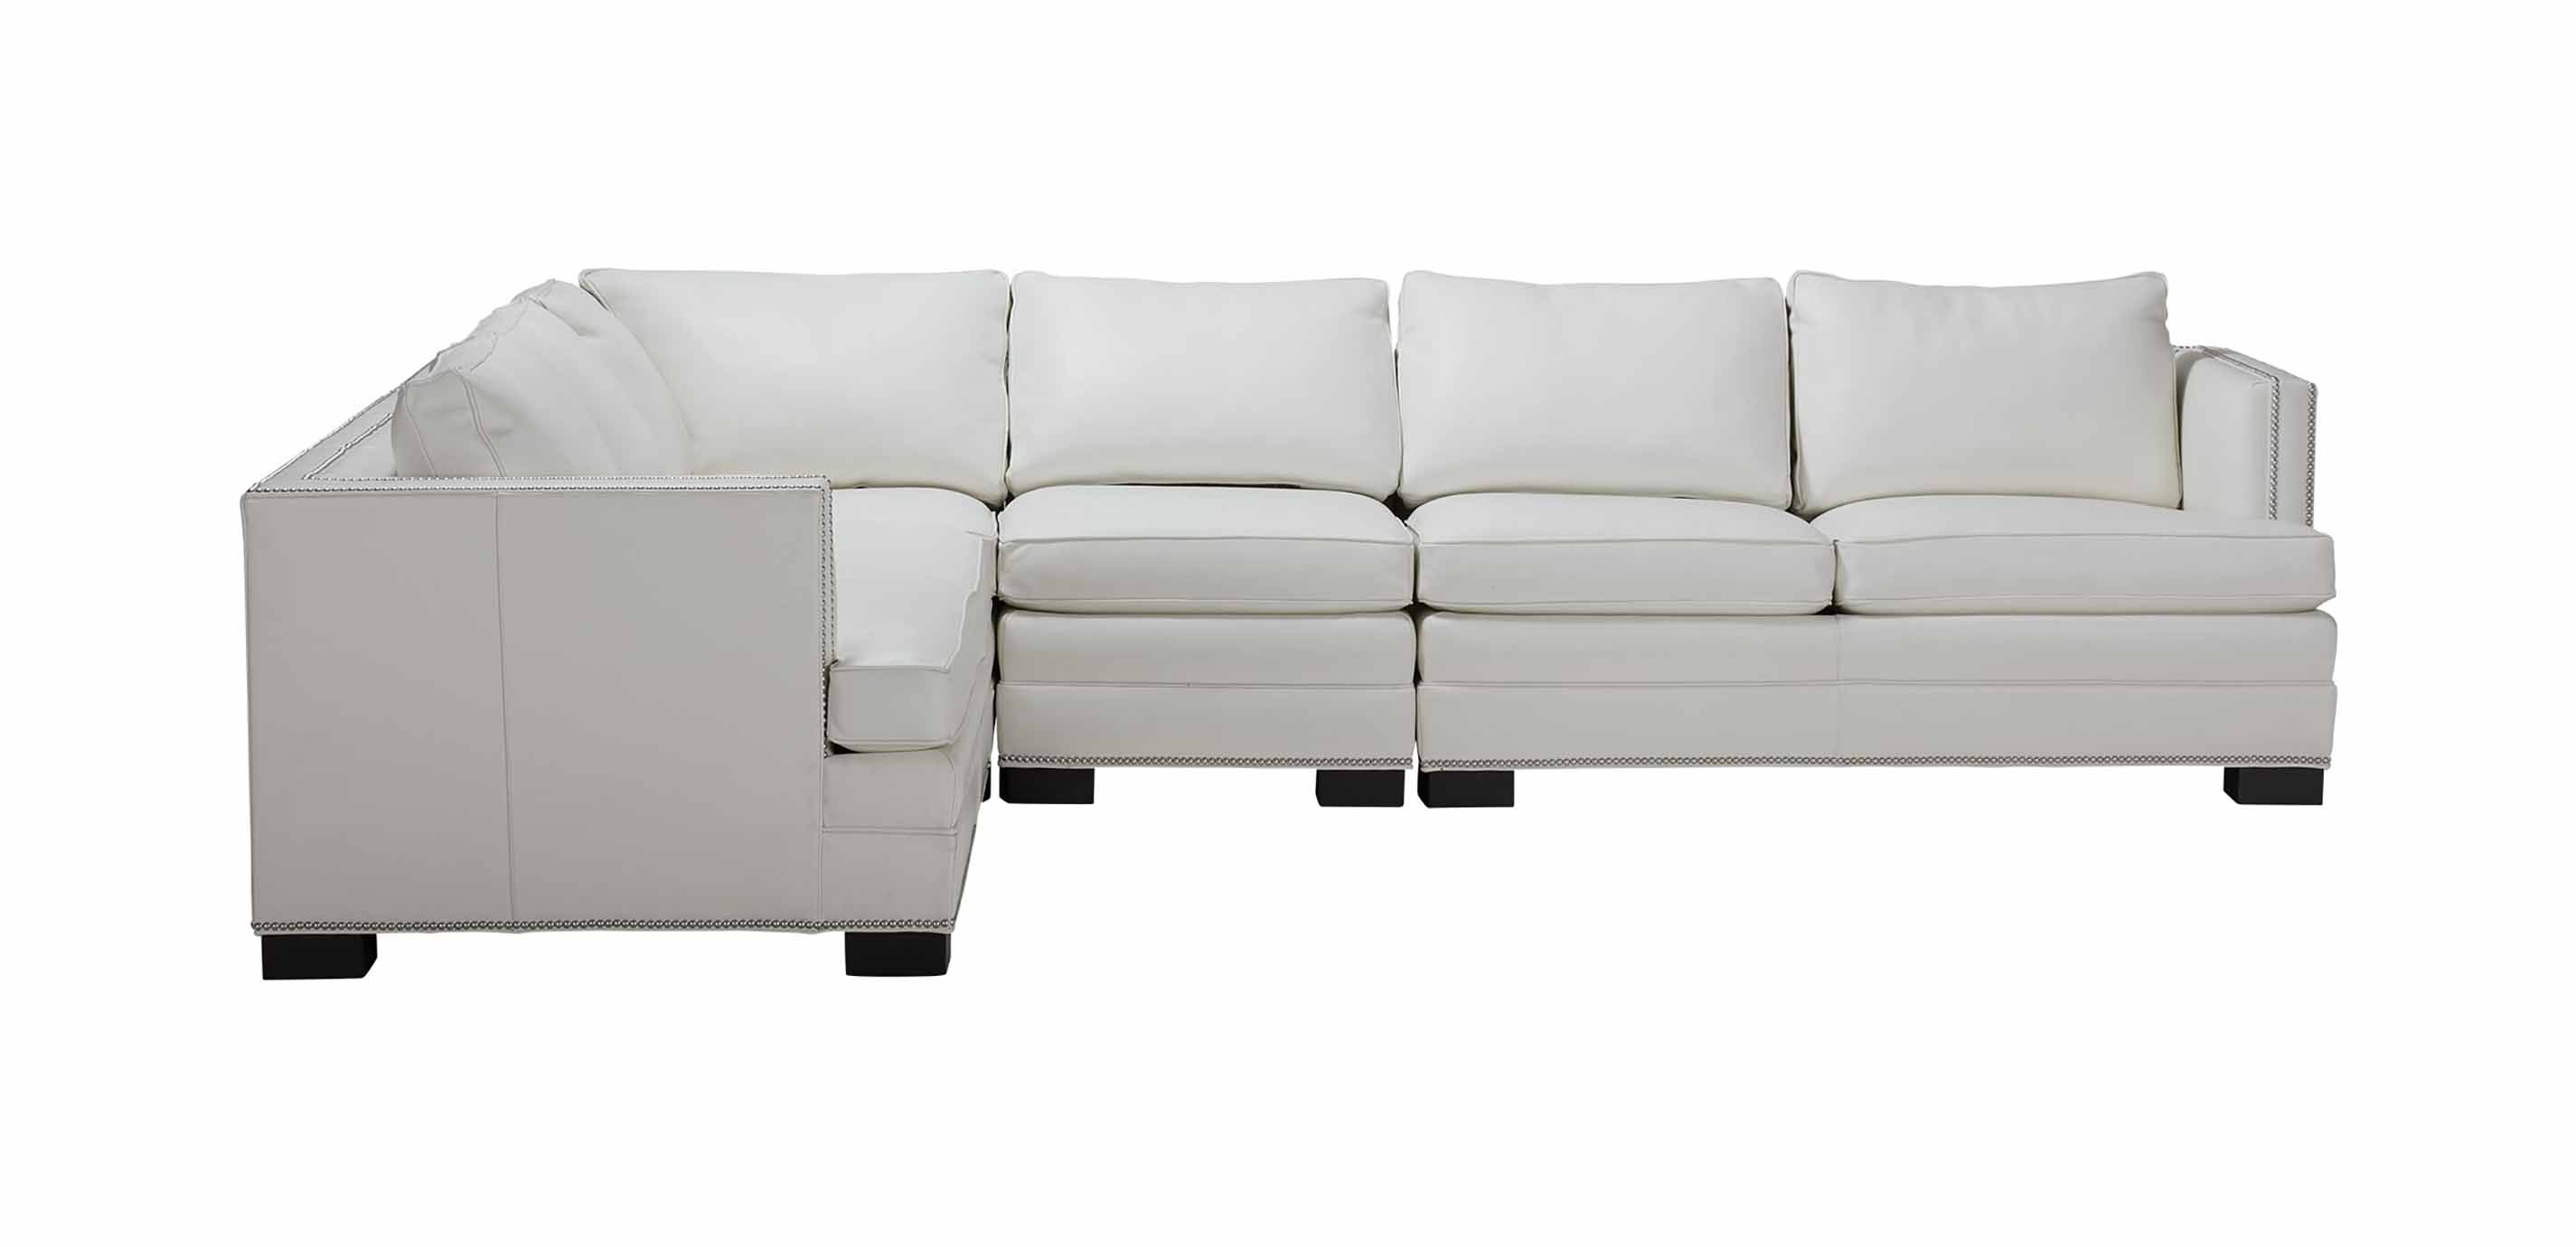 Astor Four Piece Leather Sectional